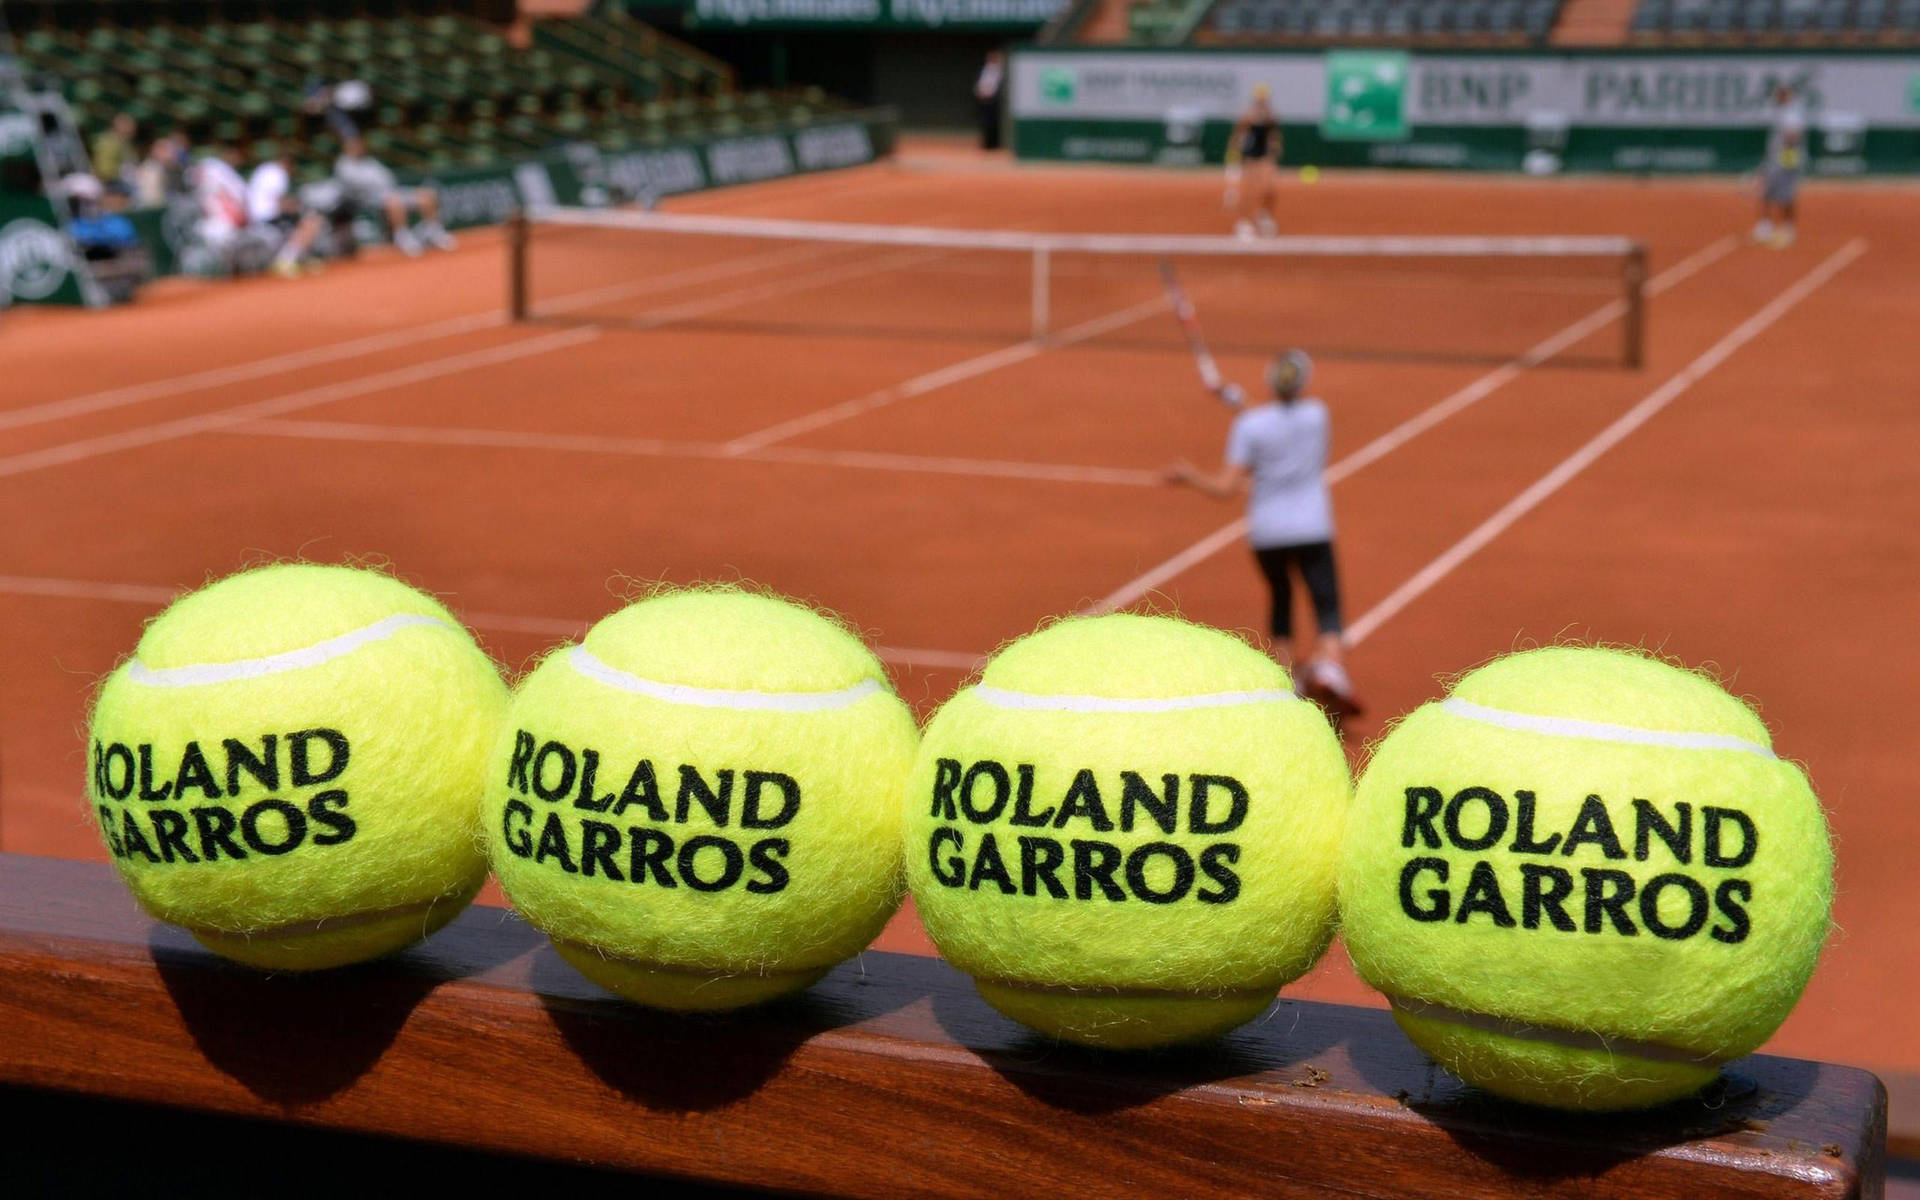 Caption: Iconic Clay Courts - A Close-up View Of Tennis Balls At The French Open Background